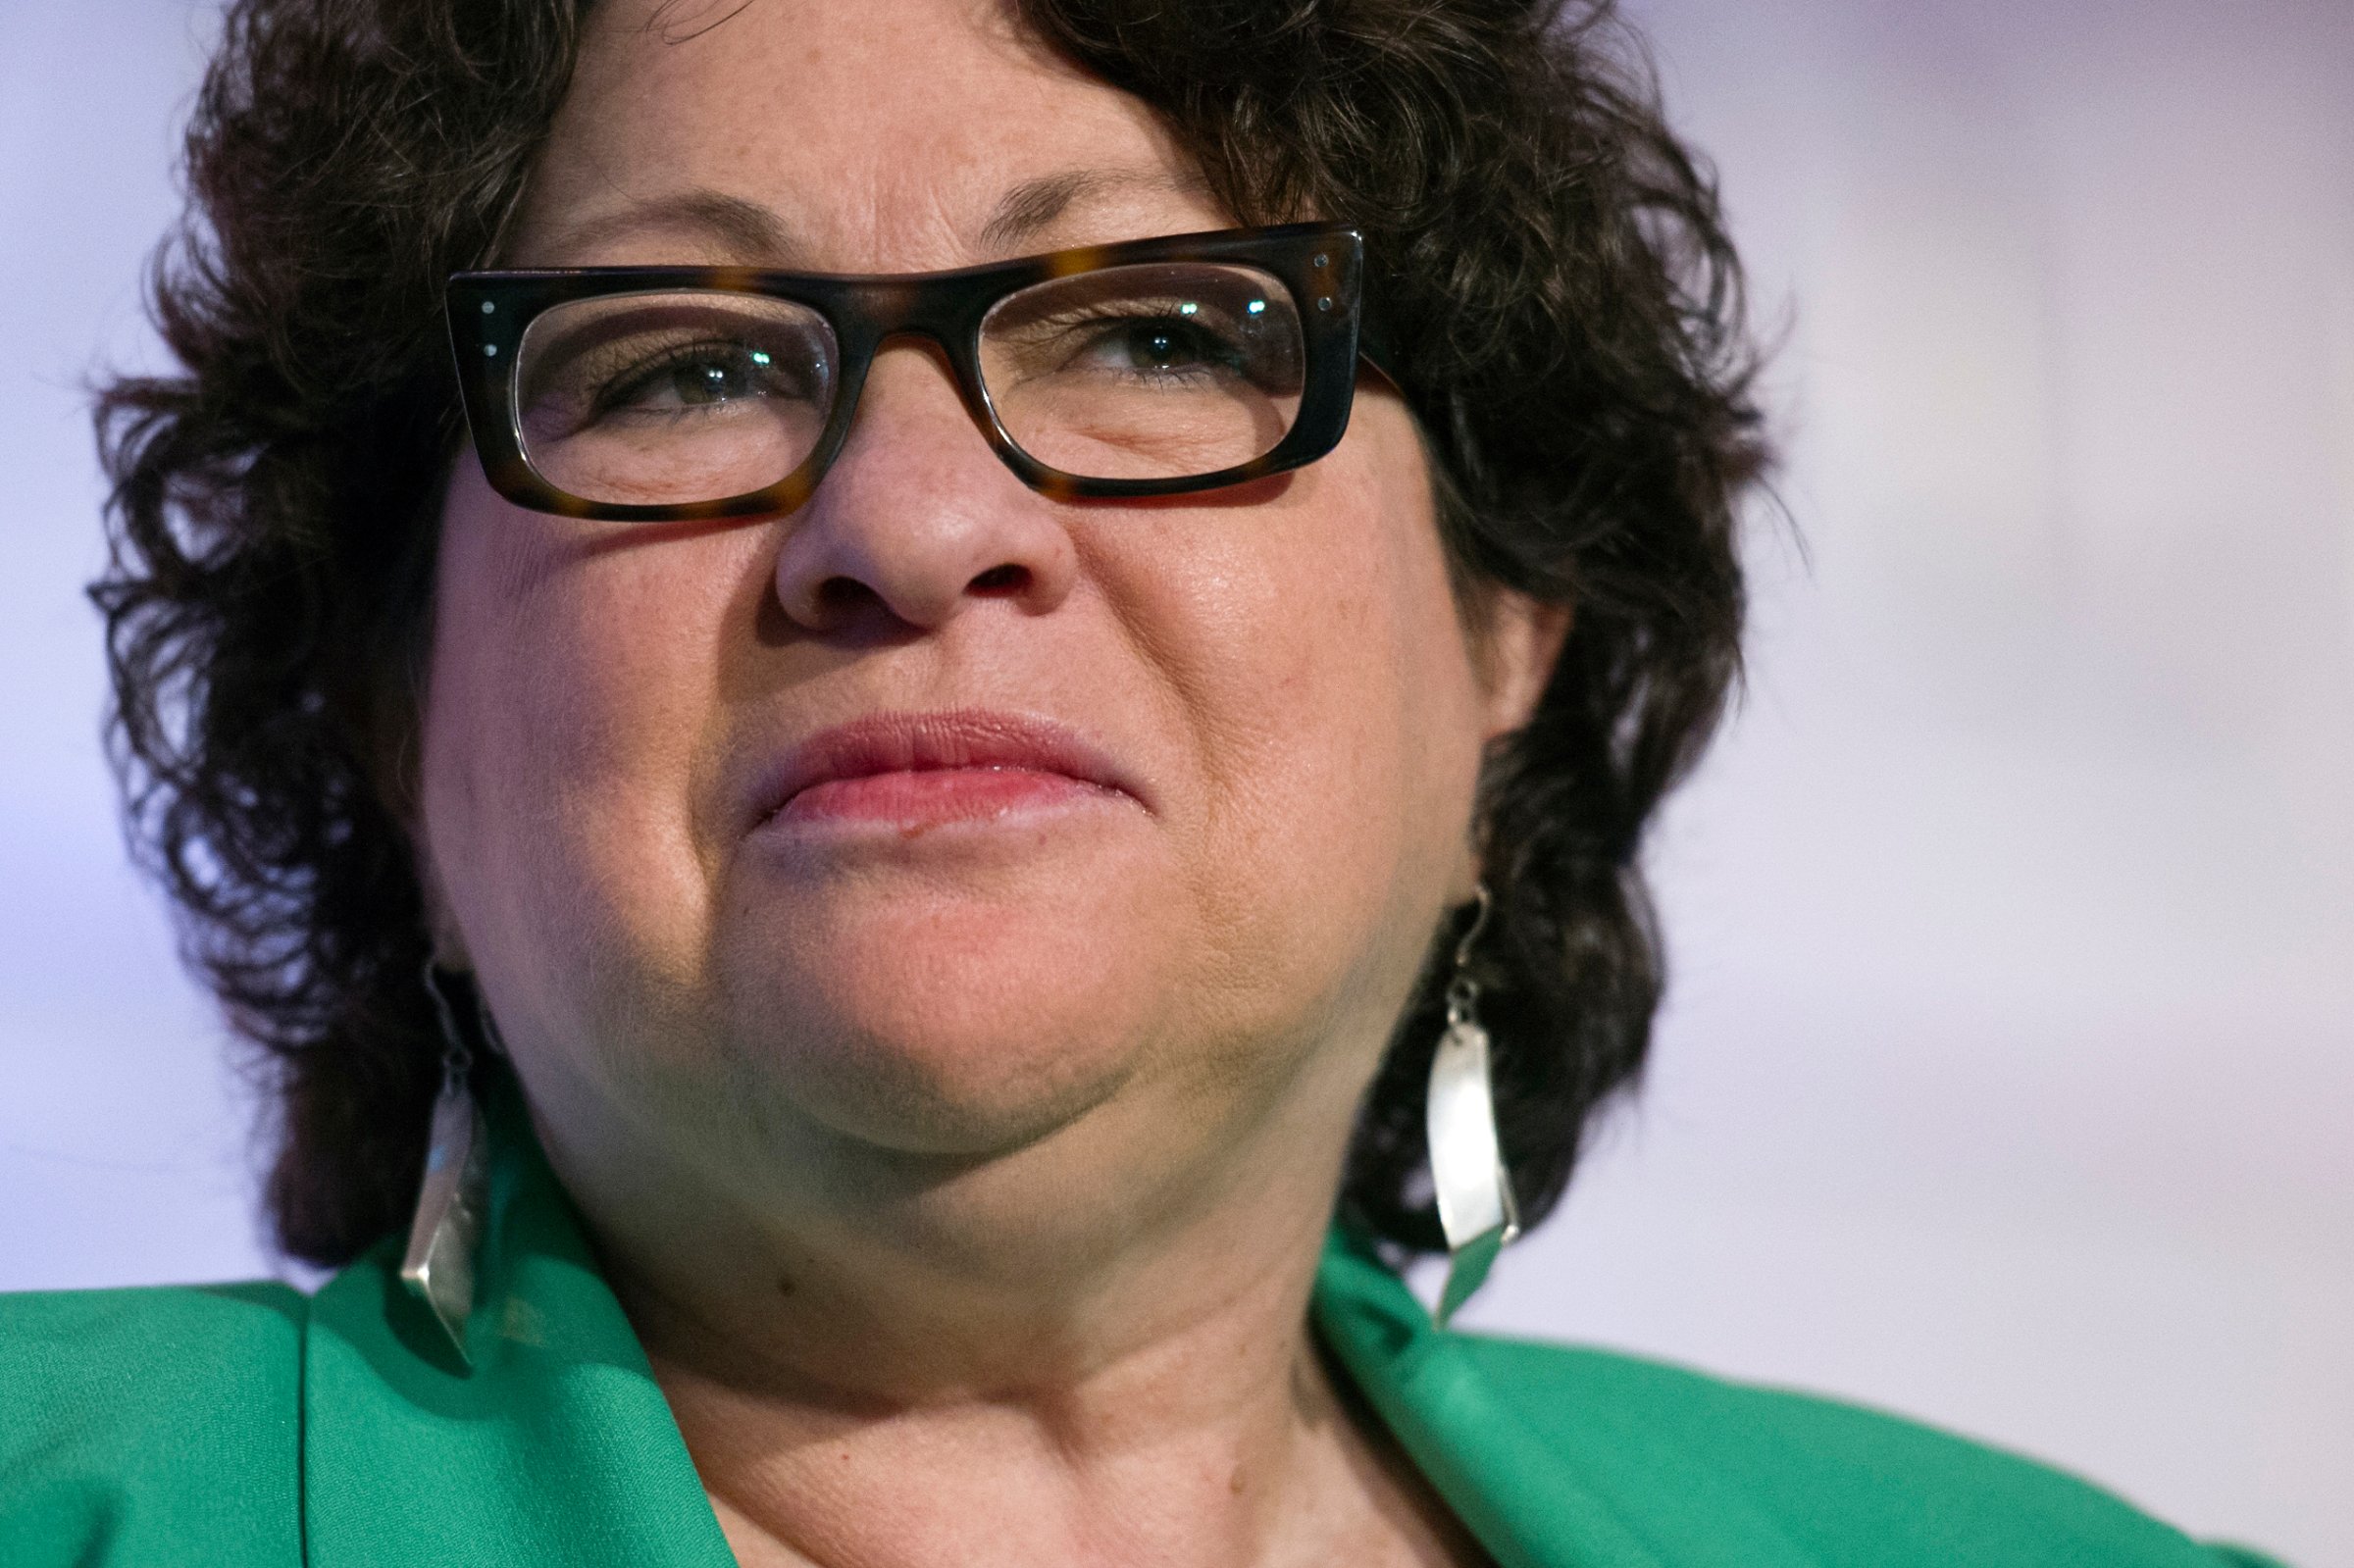 Sonia Sotomayor discusses the food traditions of the Supreme Court at the Smithsonian Museum of American History in Washington, Wednesday, June 1, 2016. (AP Photo/Cliff Owen)